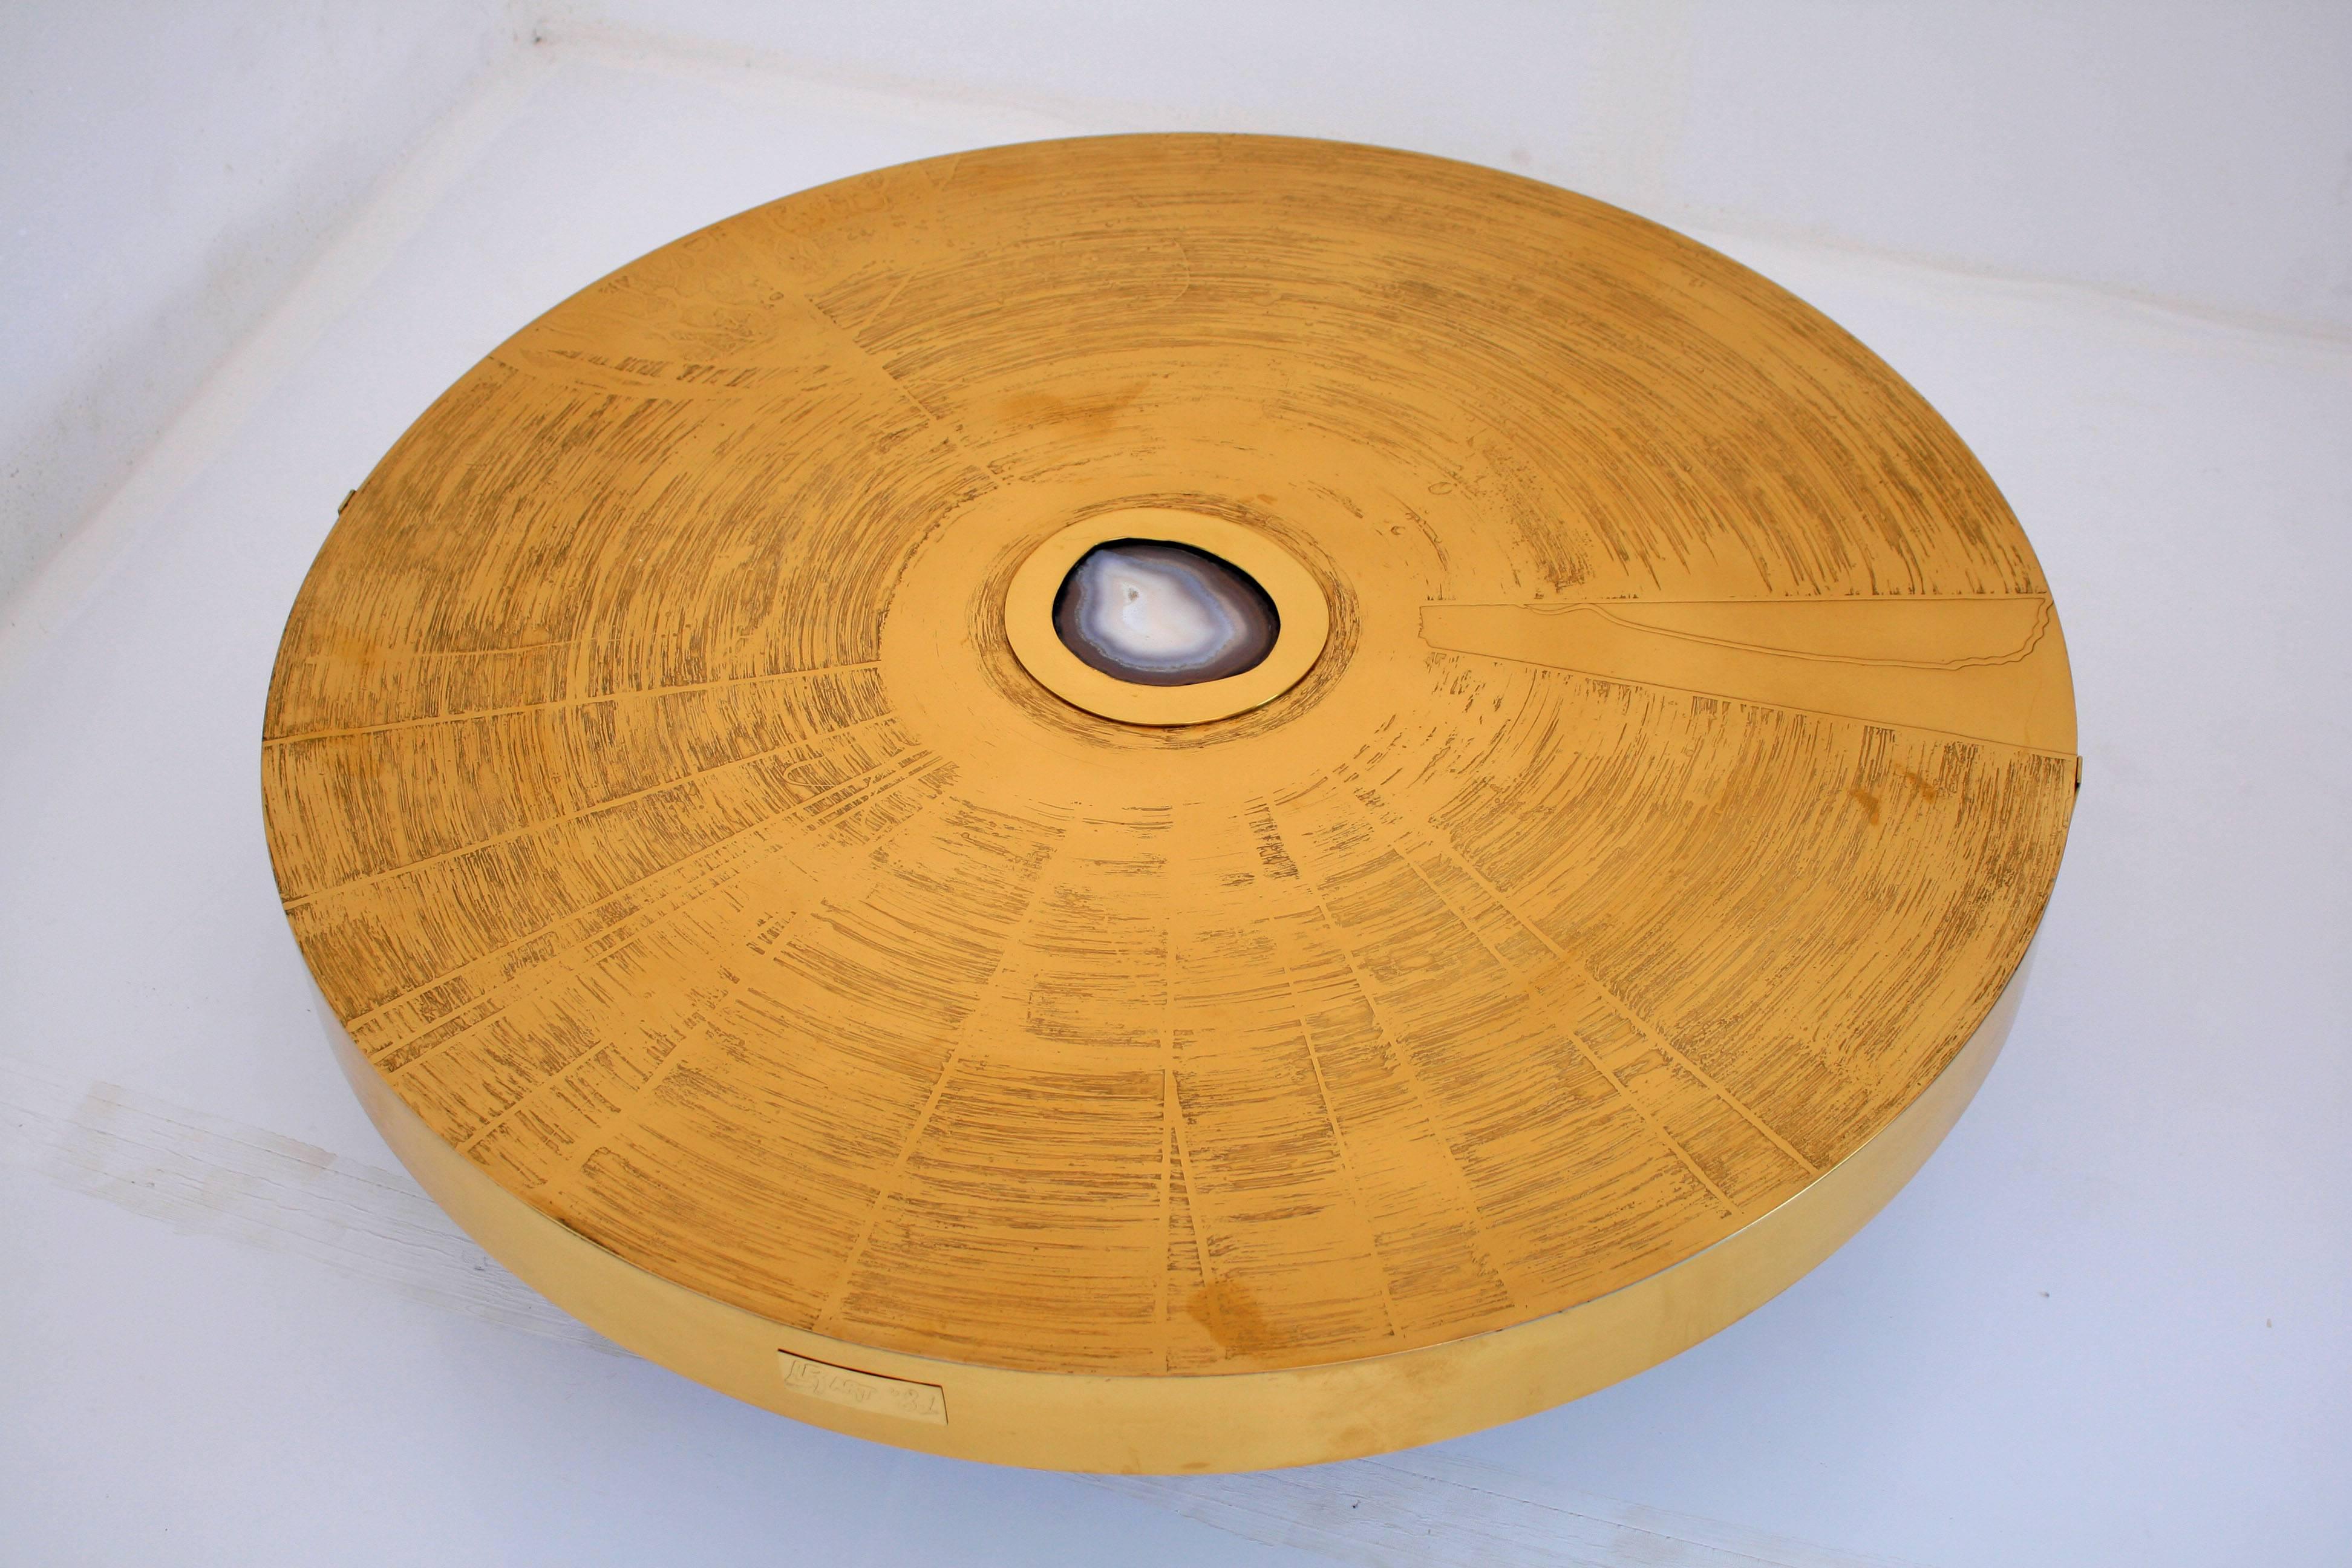 Mid-Century Modern One of a Kind Round Acid Etched Cocktail Table with Agate Stone by LR Art, 1981